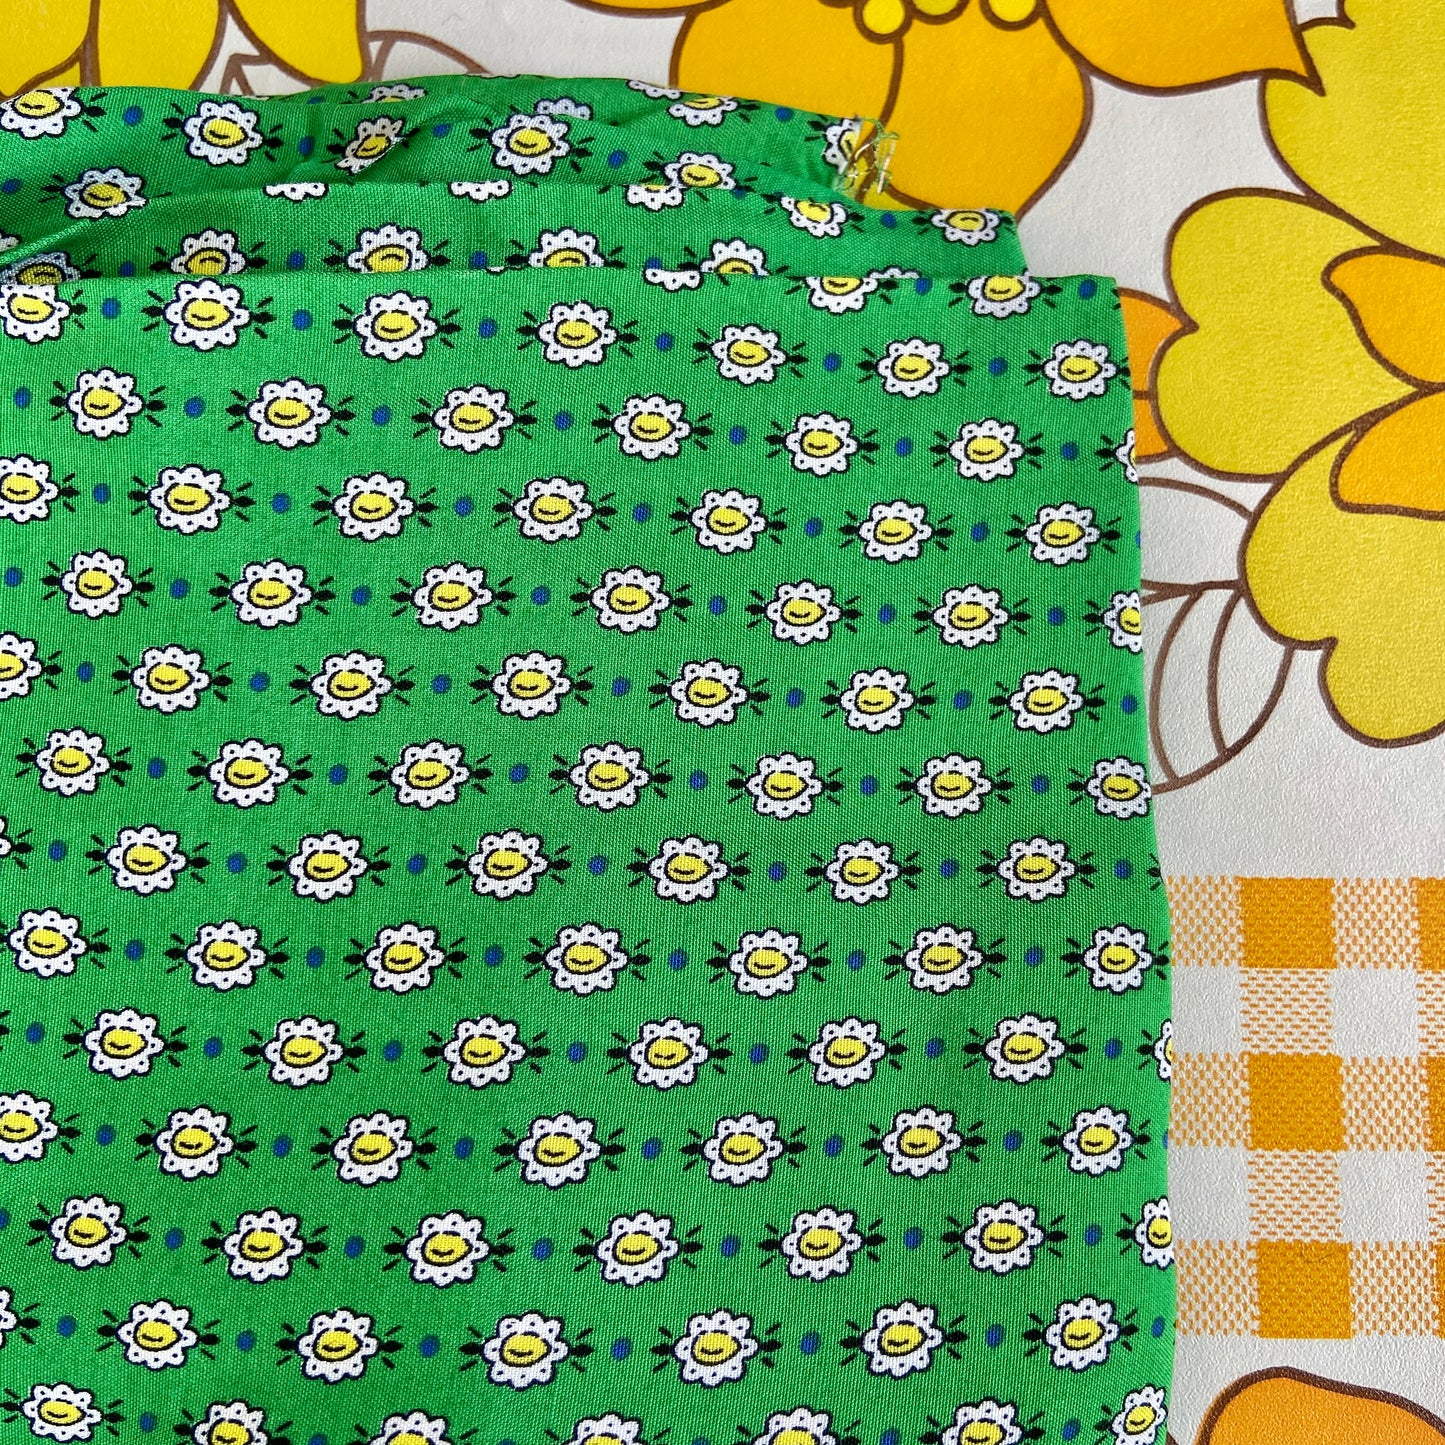 Love VINTAGE Fabric ADORABLE Vintage Cotton Green BRIGHT Craft Sewing